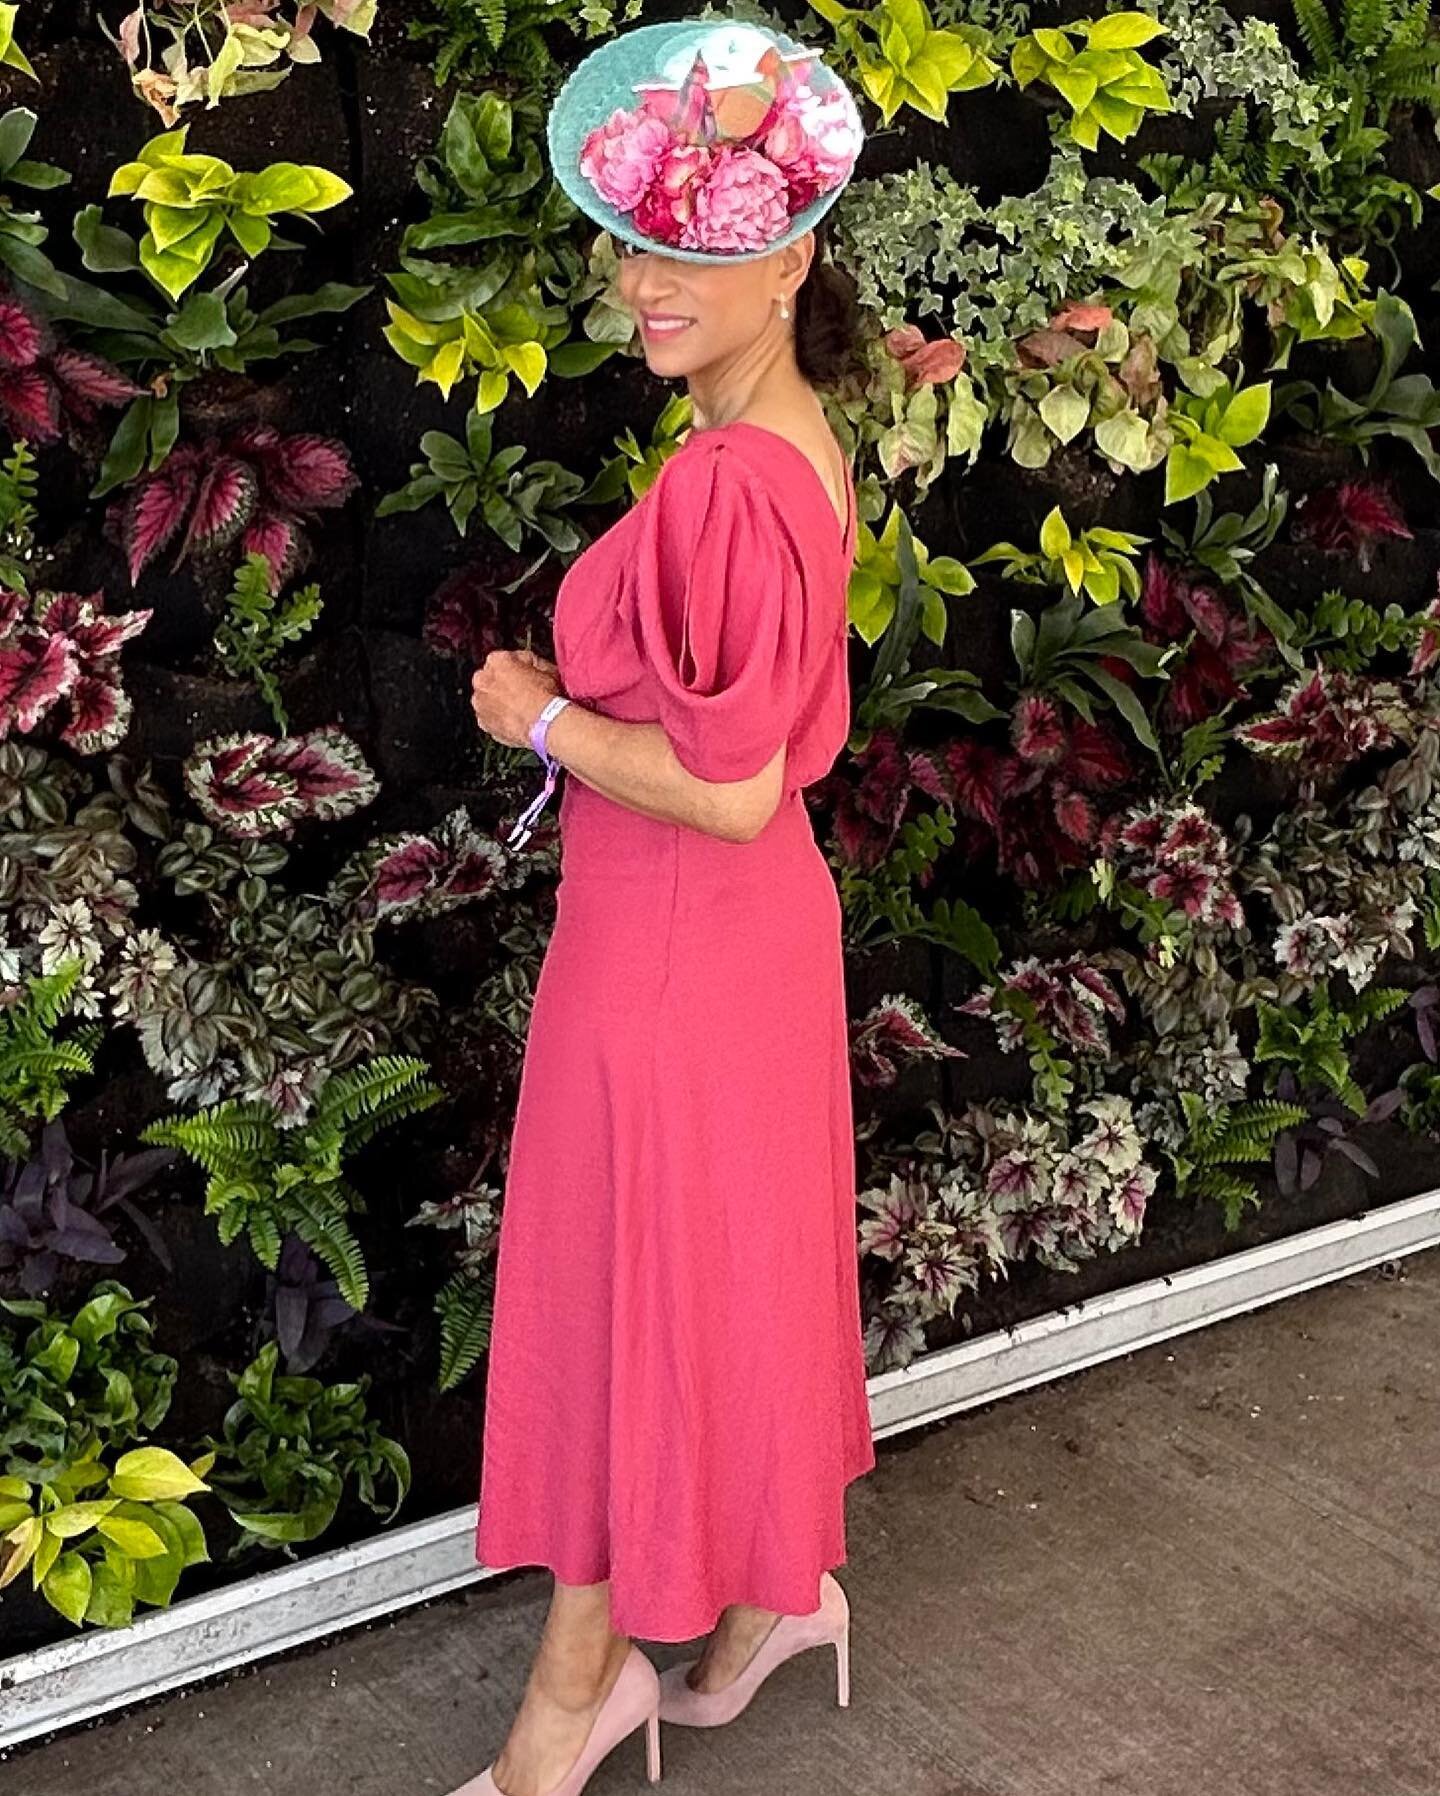 Swoon! @jenniferjonesaustin really took our breath away with her look for the Oaks at Kentucky Derby 2023
Derby is done but saddle up for Royal Ascot, Preakness, Belmont and the Saratoga race season&hellip;🏇🏾
🏇🏾
🏇🏾
🏇🏾
 #hat #hatshop #hatshopn